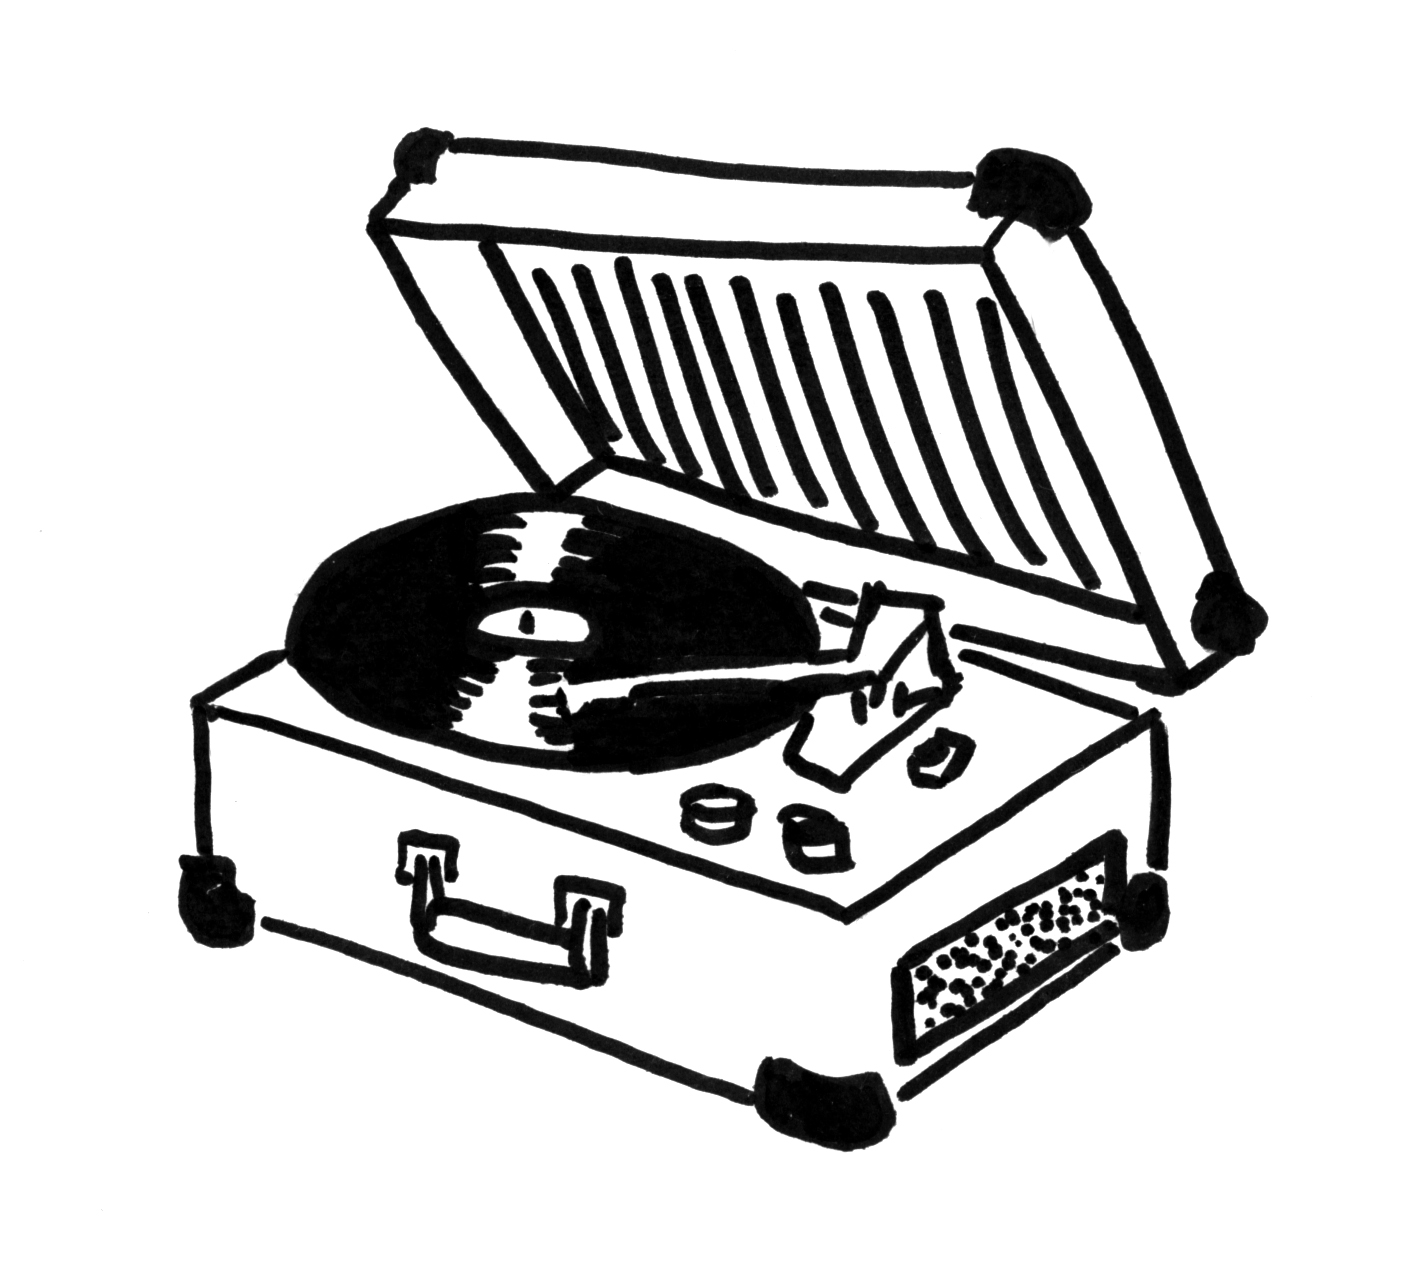 Record Player Drawing Simple : Record Laser Player Drawing Wall Cut Old ...